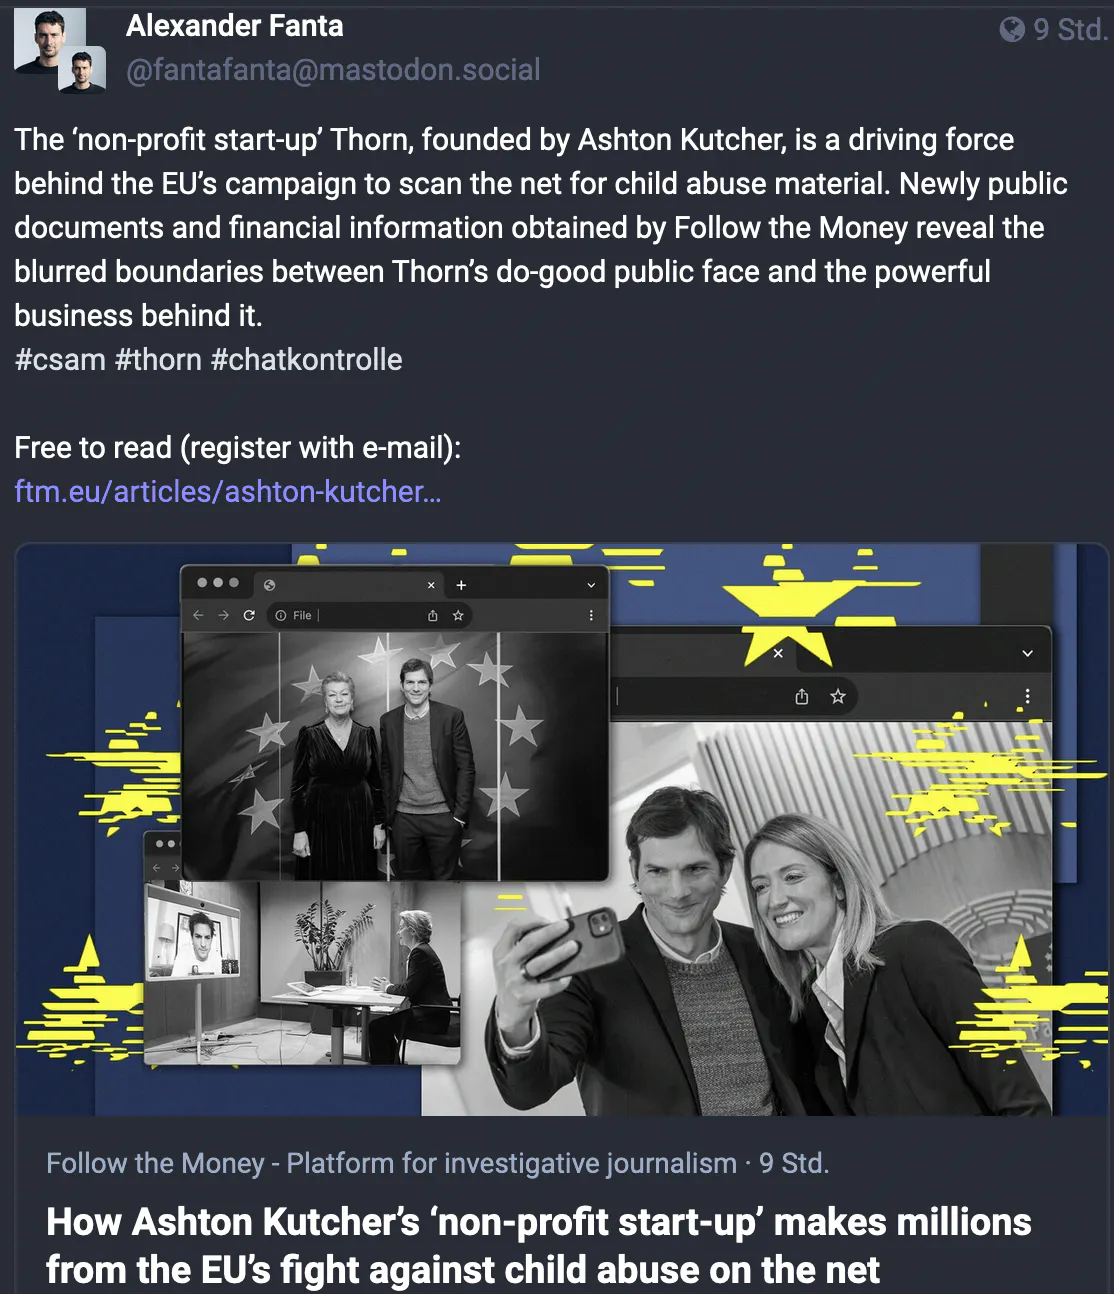 The ‘non-profit start-up’ Thorn, founded by Ashton Kutcher, is a driving the EU’s campaign to scan the net for child abuse material. Documents obtained by 
 reveal the blurred boundaries between Thorn’s public face and the powerful business behind it